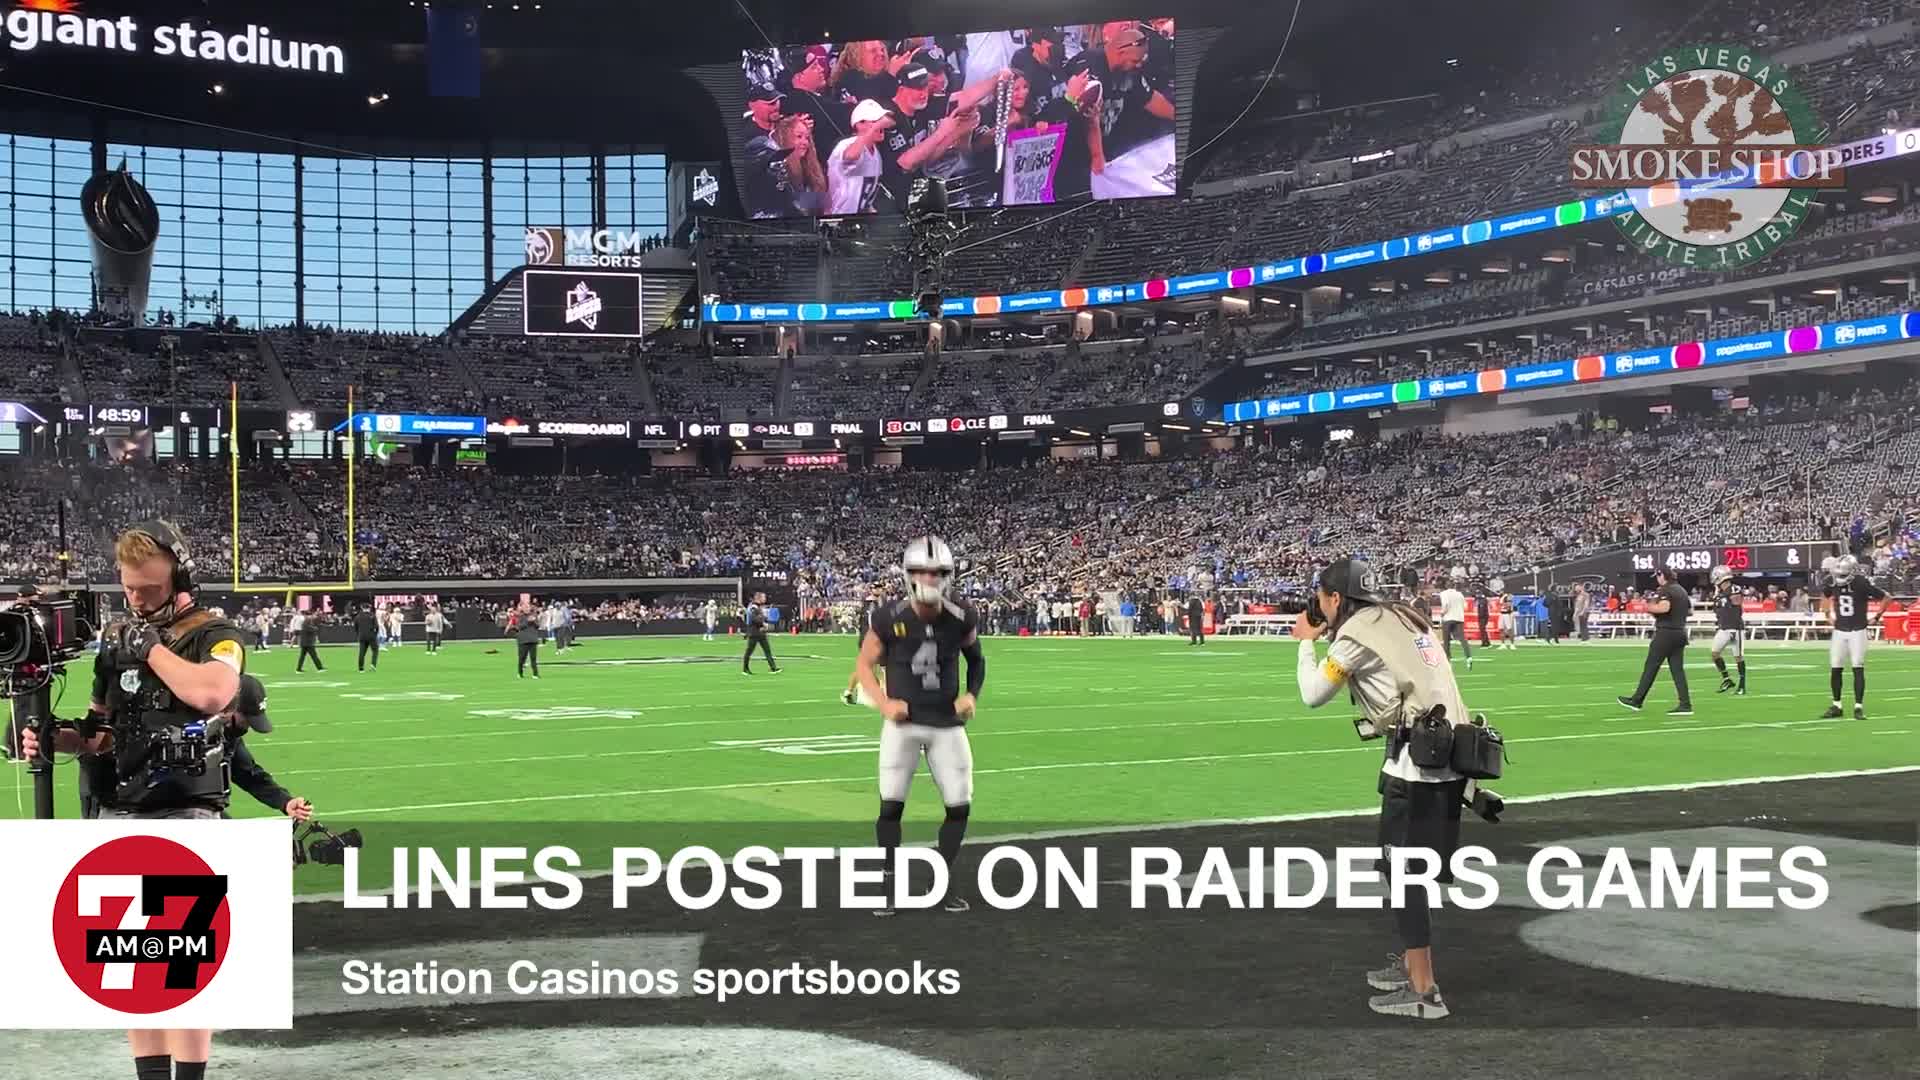 Lines posted on Raiders Games